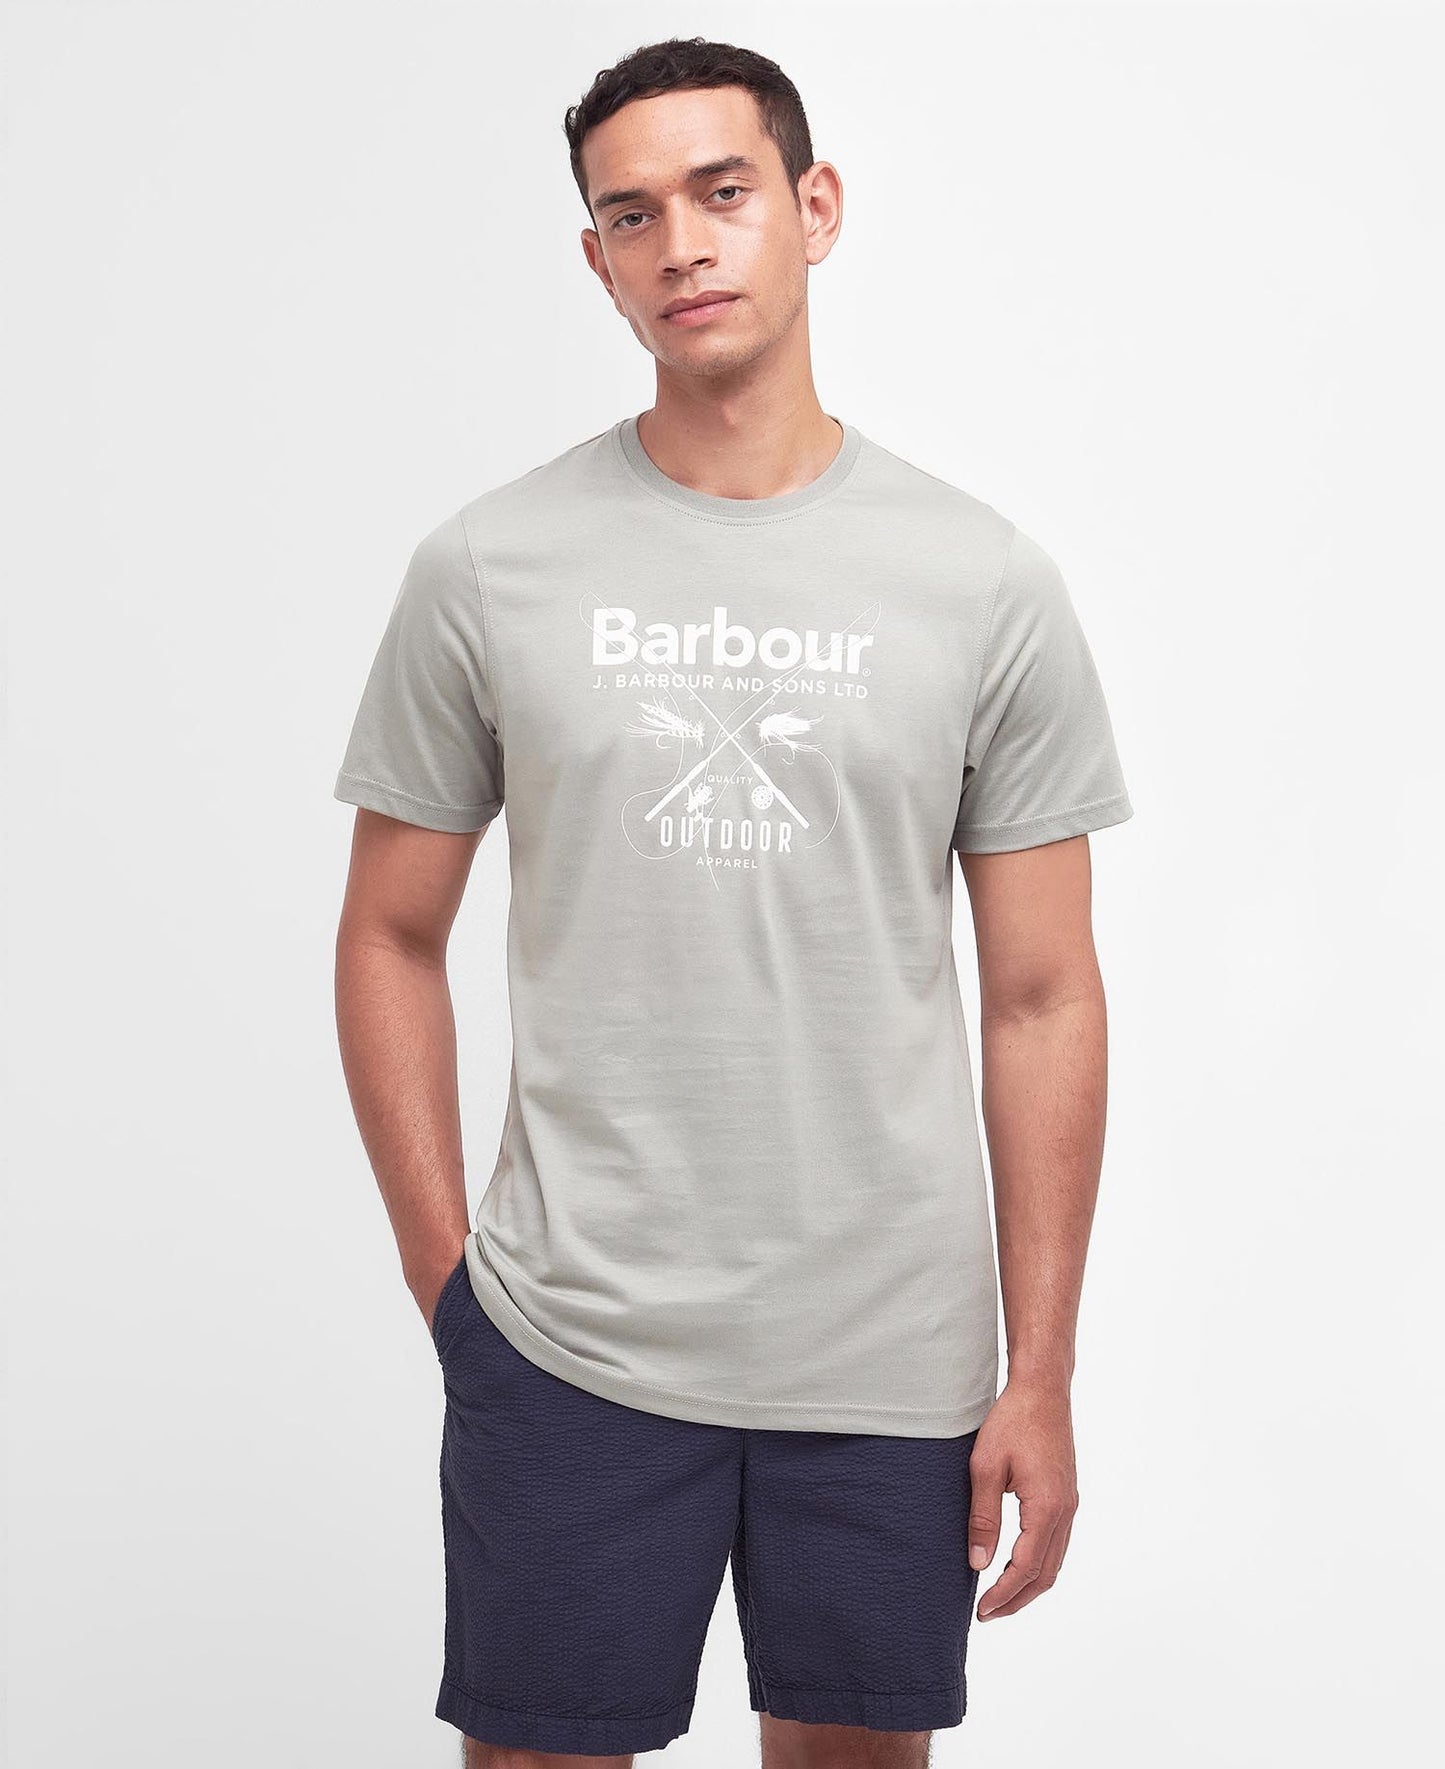 Barbour Classic Fly T-shirt